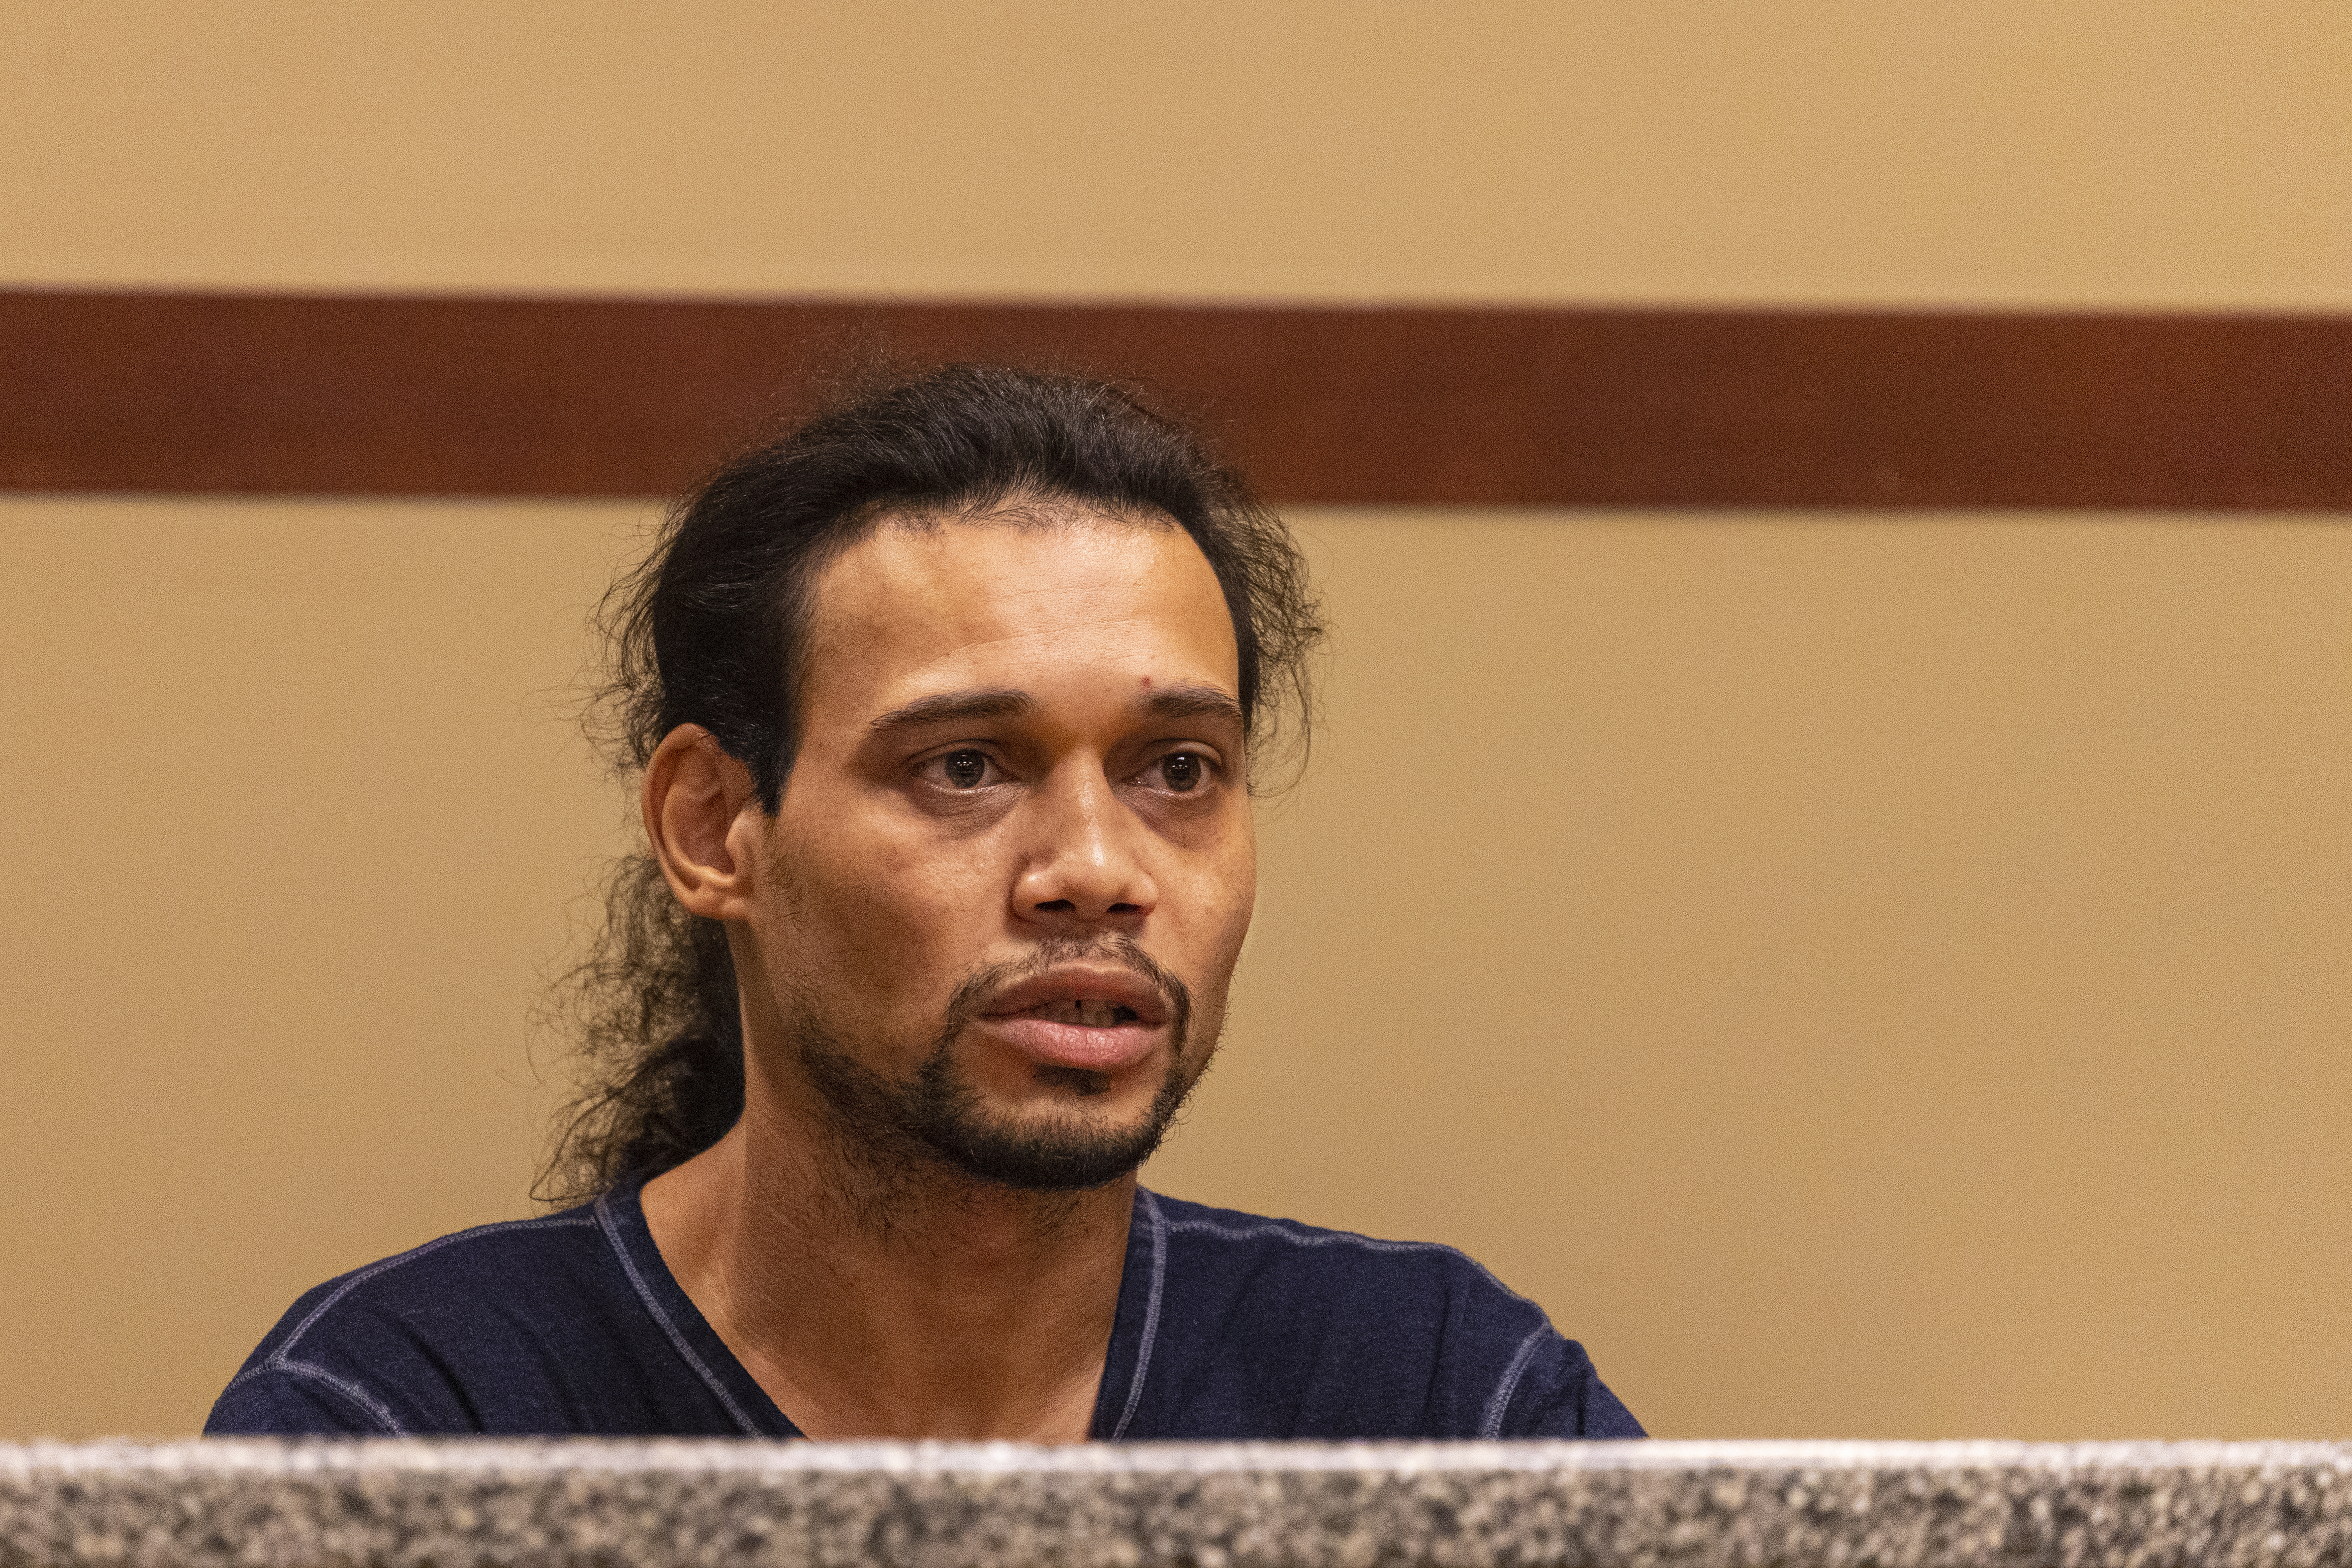 Kenneth Harris testifies a witness who called 911 after seeing Joseph Wilder’s truck crash speaks during the preliminary examination for (not pictured) Rishy Manning, 22, Javonte Rosa, 23 and Jaheim Hayes-Goree, 20, at the 63rd District Courthouse in Grand Rapids, Michigan on Thursday, June 30, 2022. The trio of defendants who appeared in court, are charged with felony murder in the shooting death of Wilder, 50, who was shot and killed during a robbery attempt at a Huntington Bank ATM on South Division Avenue in May of 2022. (Joel Bissell | MLive.com)